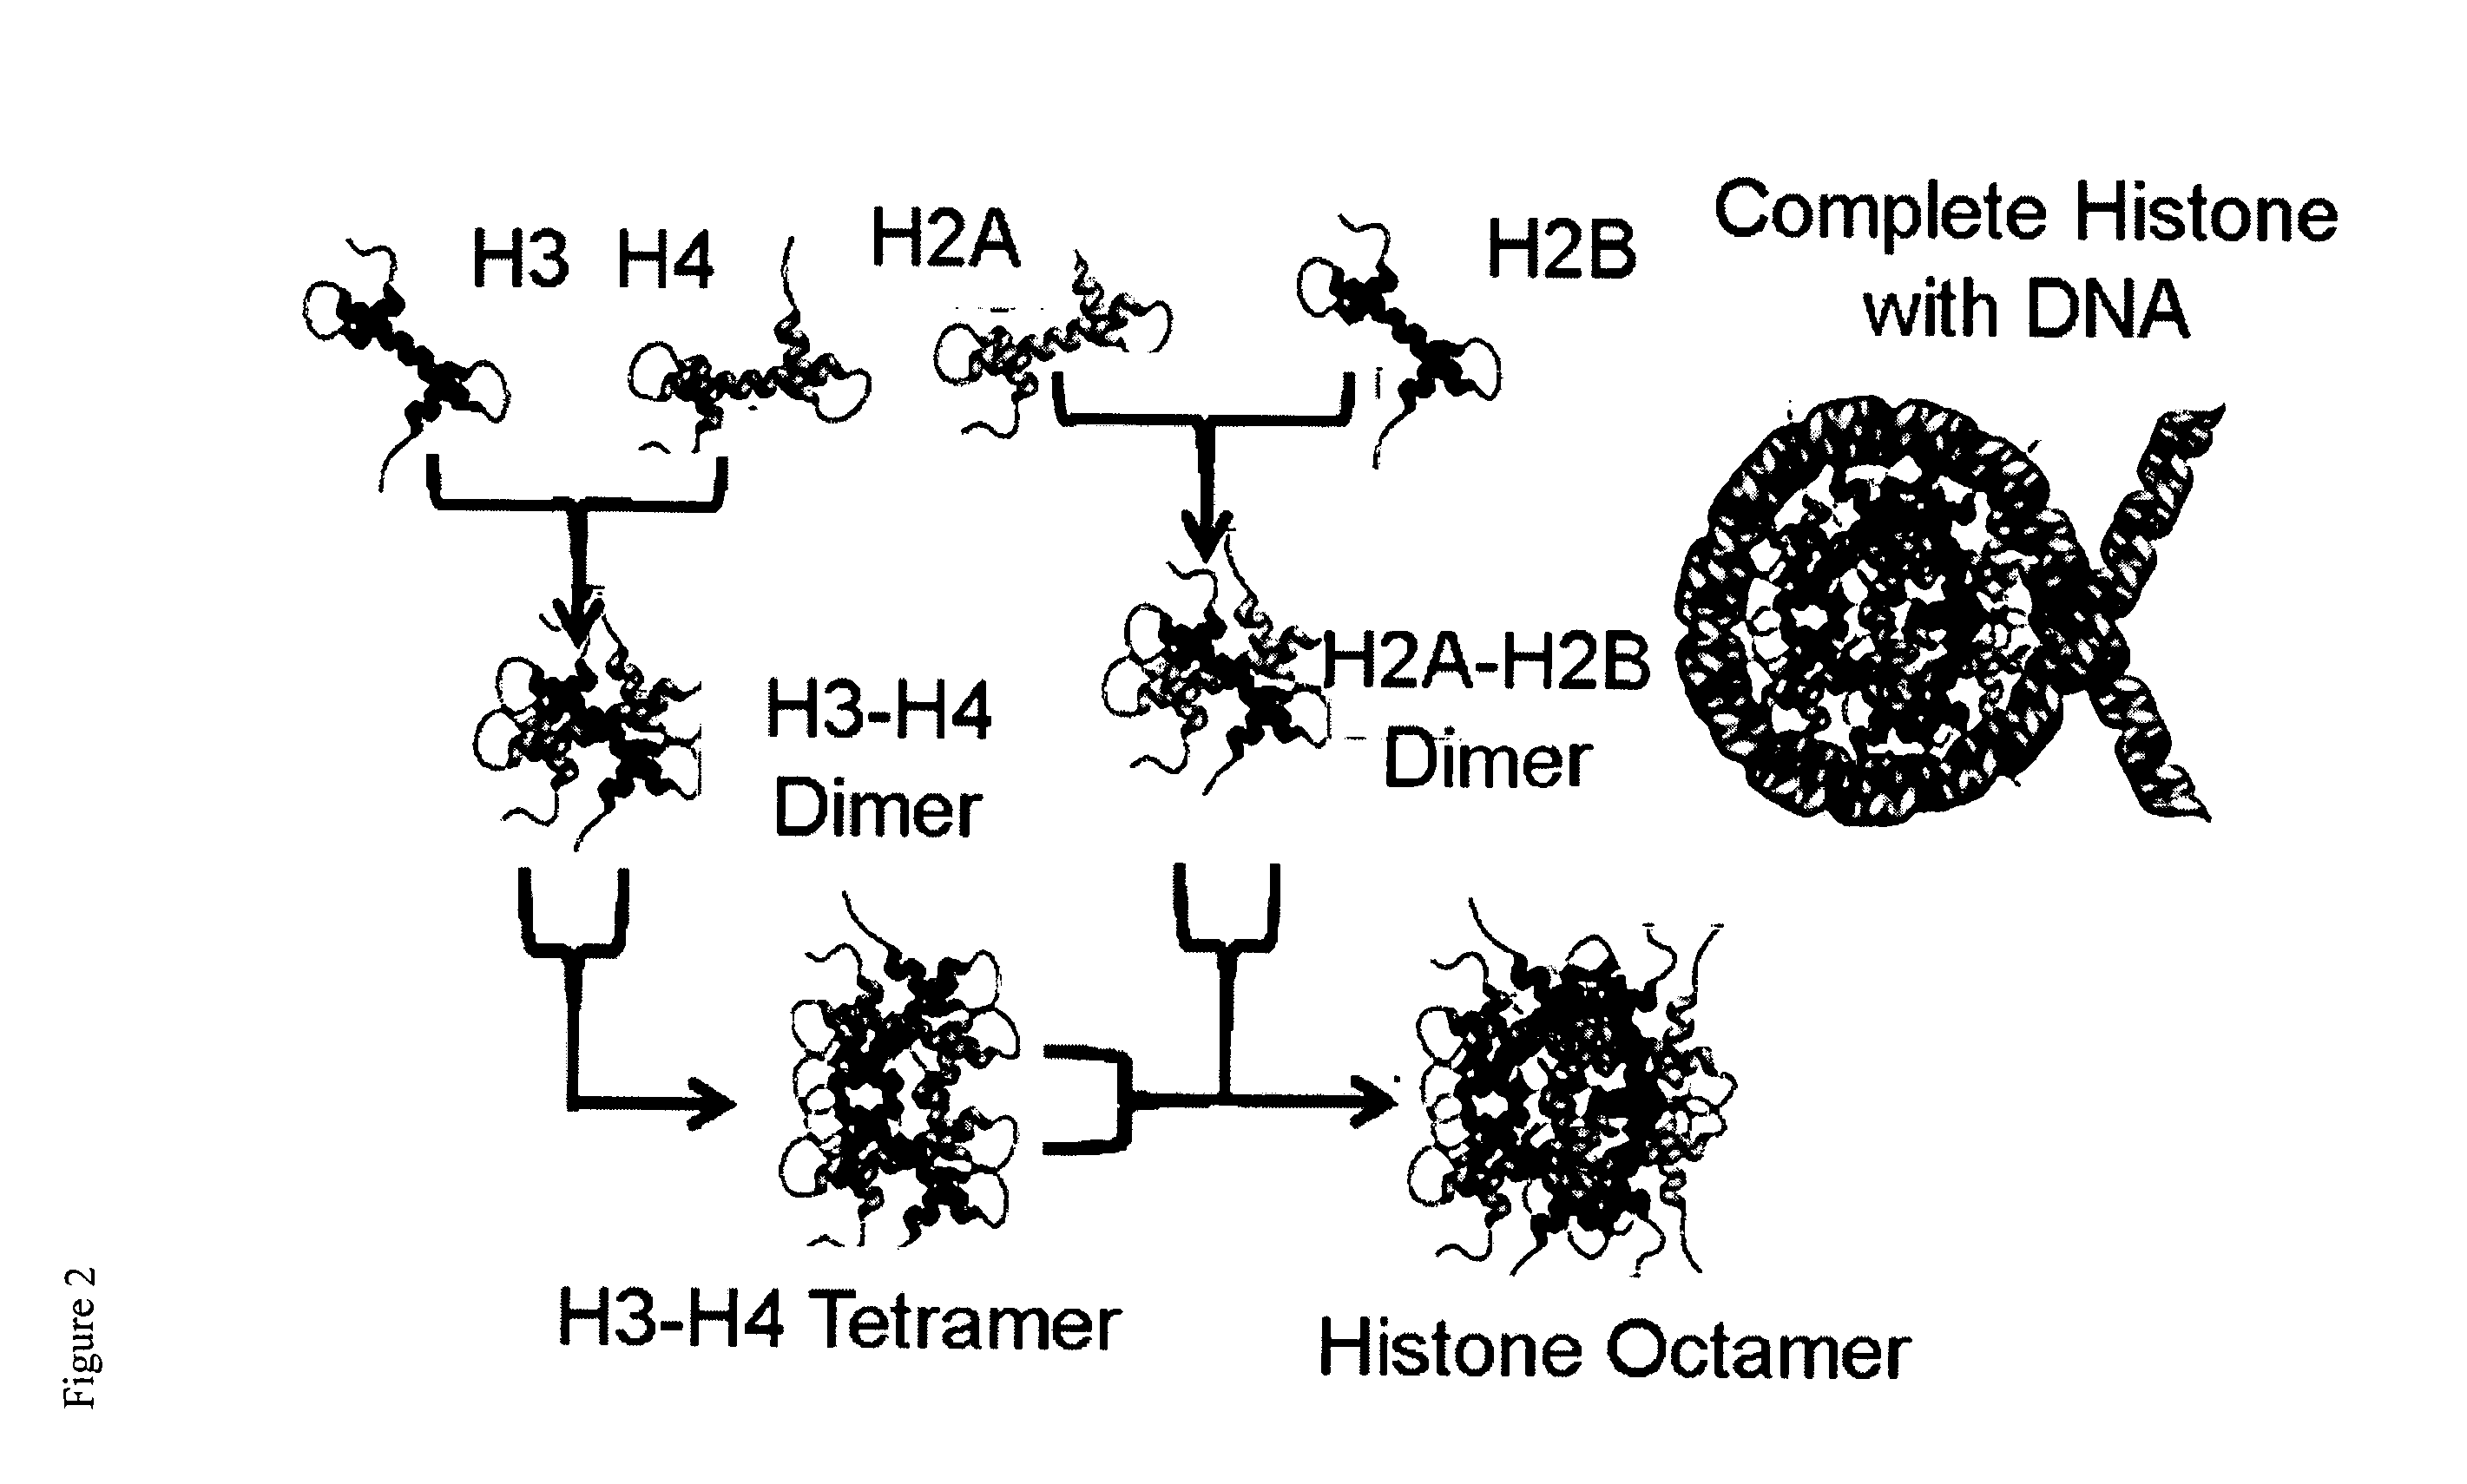 Metal complexes having dual histone deacetylase inhibitory and DNA-binding activity